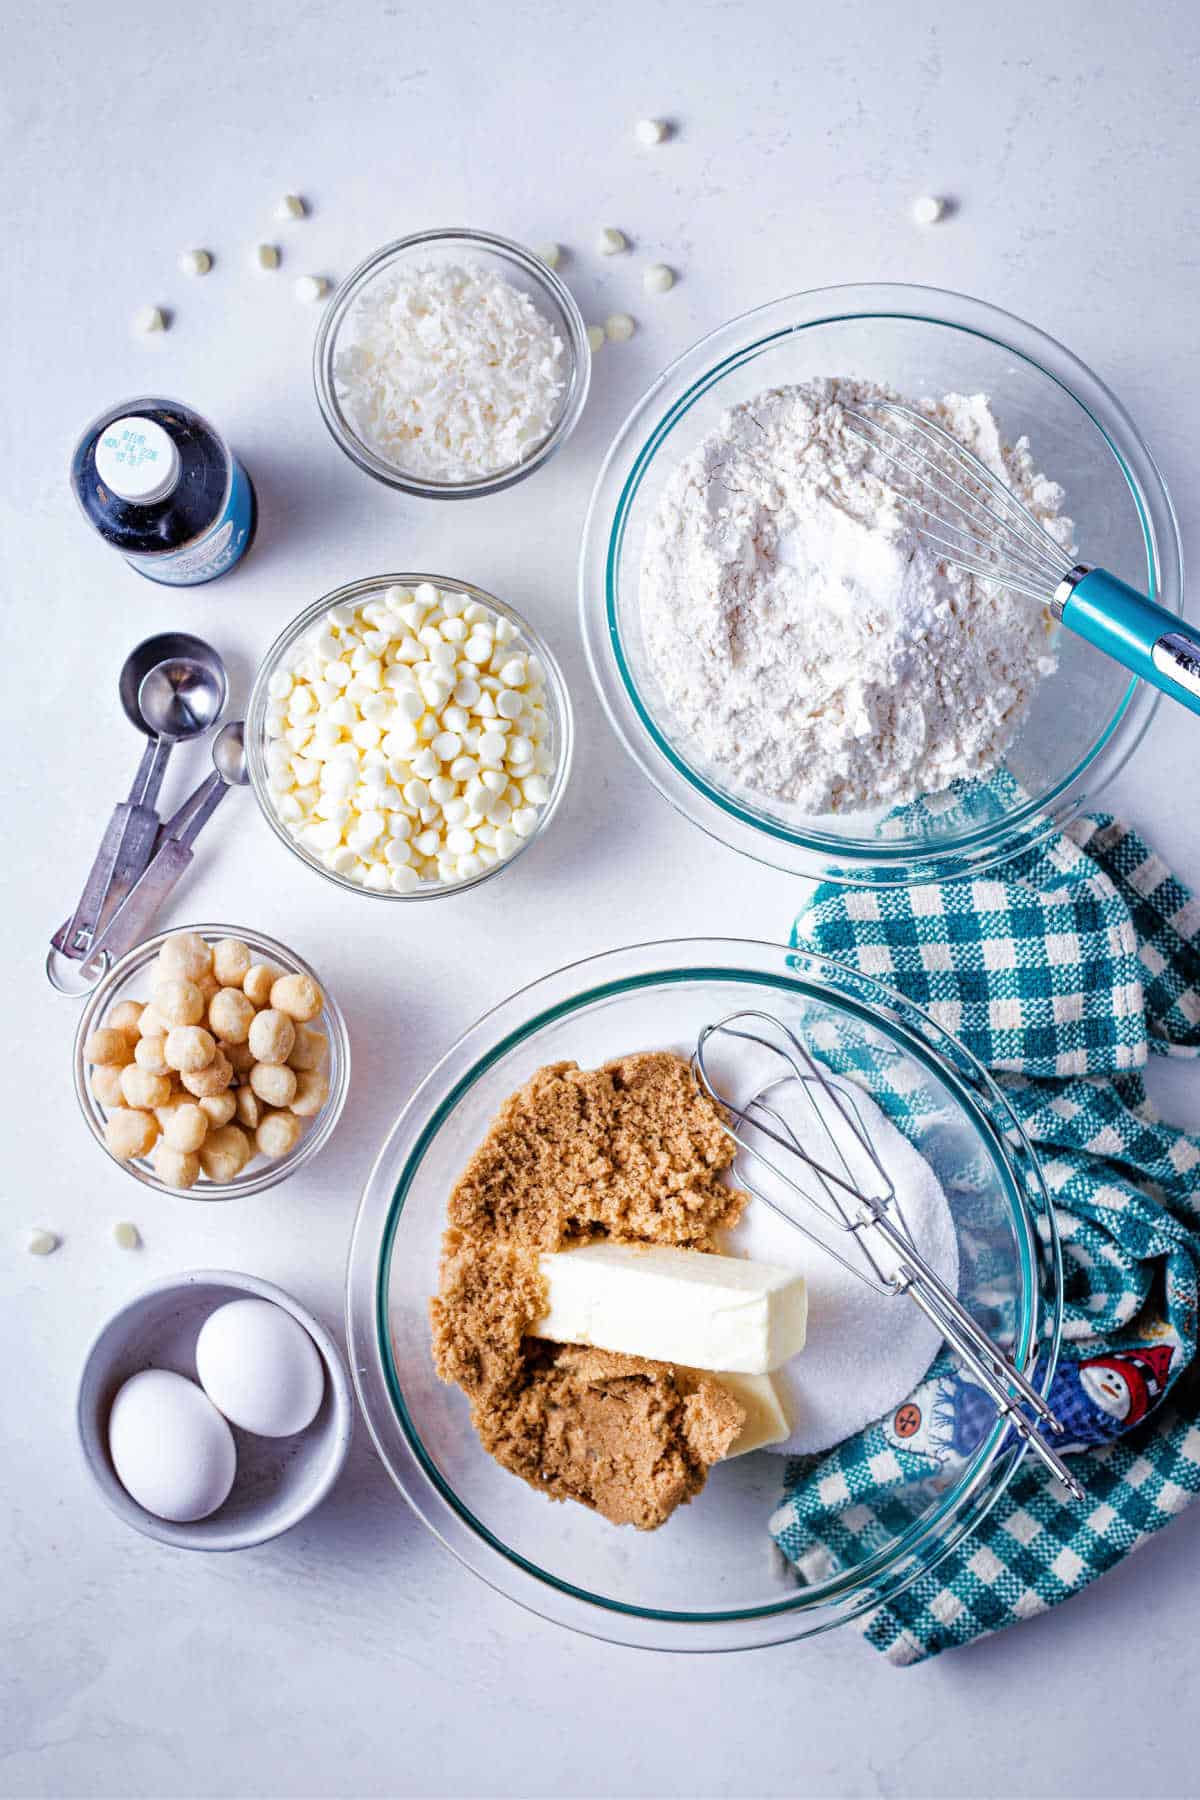 ingredients for white chocolate macadamia nut cookies on a table: butter, brown sugar, granulated sugar, eggs, flour, white chocolate chips, coconut, and macadamia nuts.